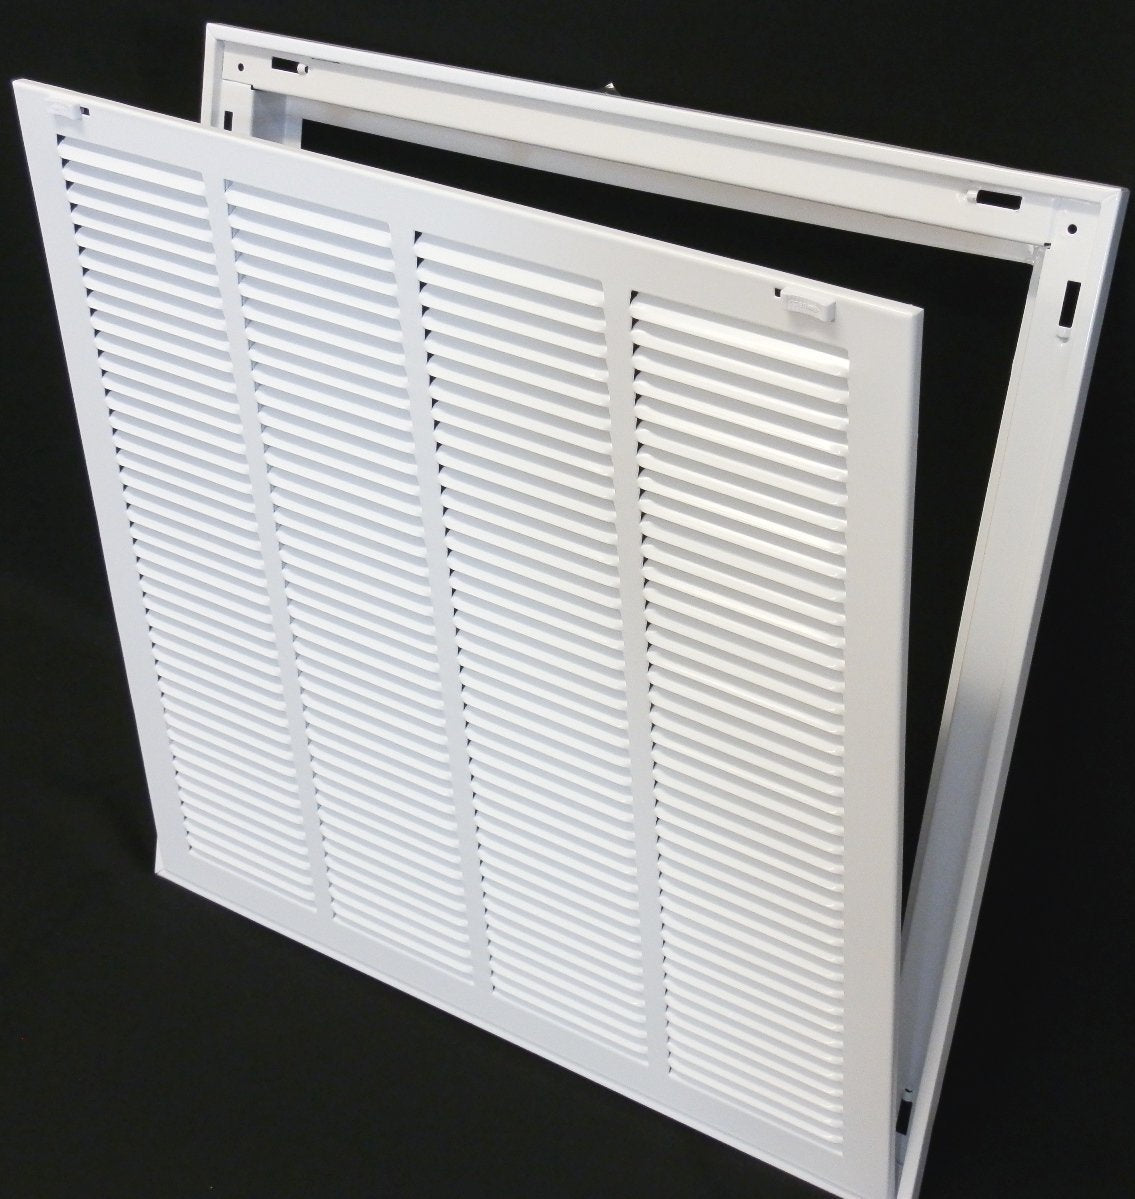 8&quot; X 20&quot; Steel Return Air Filter Grille for 1&quot; Filter - Removable Frame - [Outer Dimensions: 10 5/8&quot; X 22 5/8&quot;]